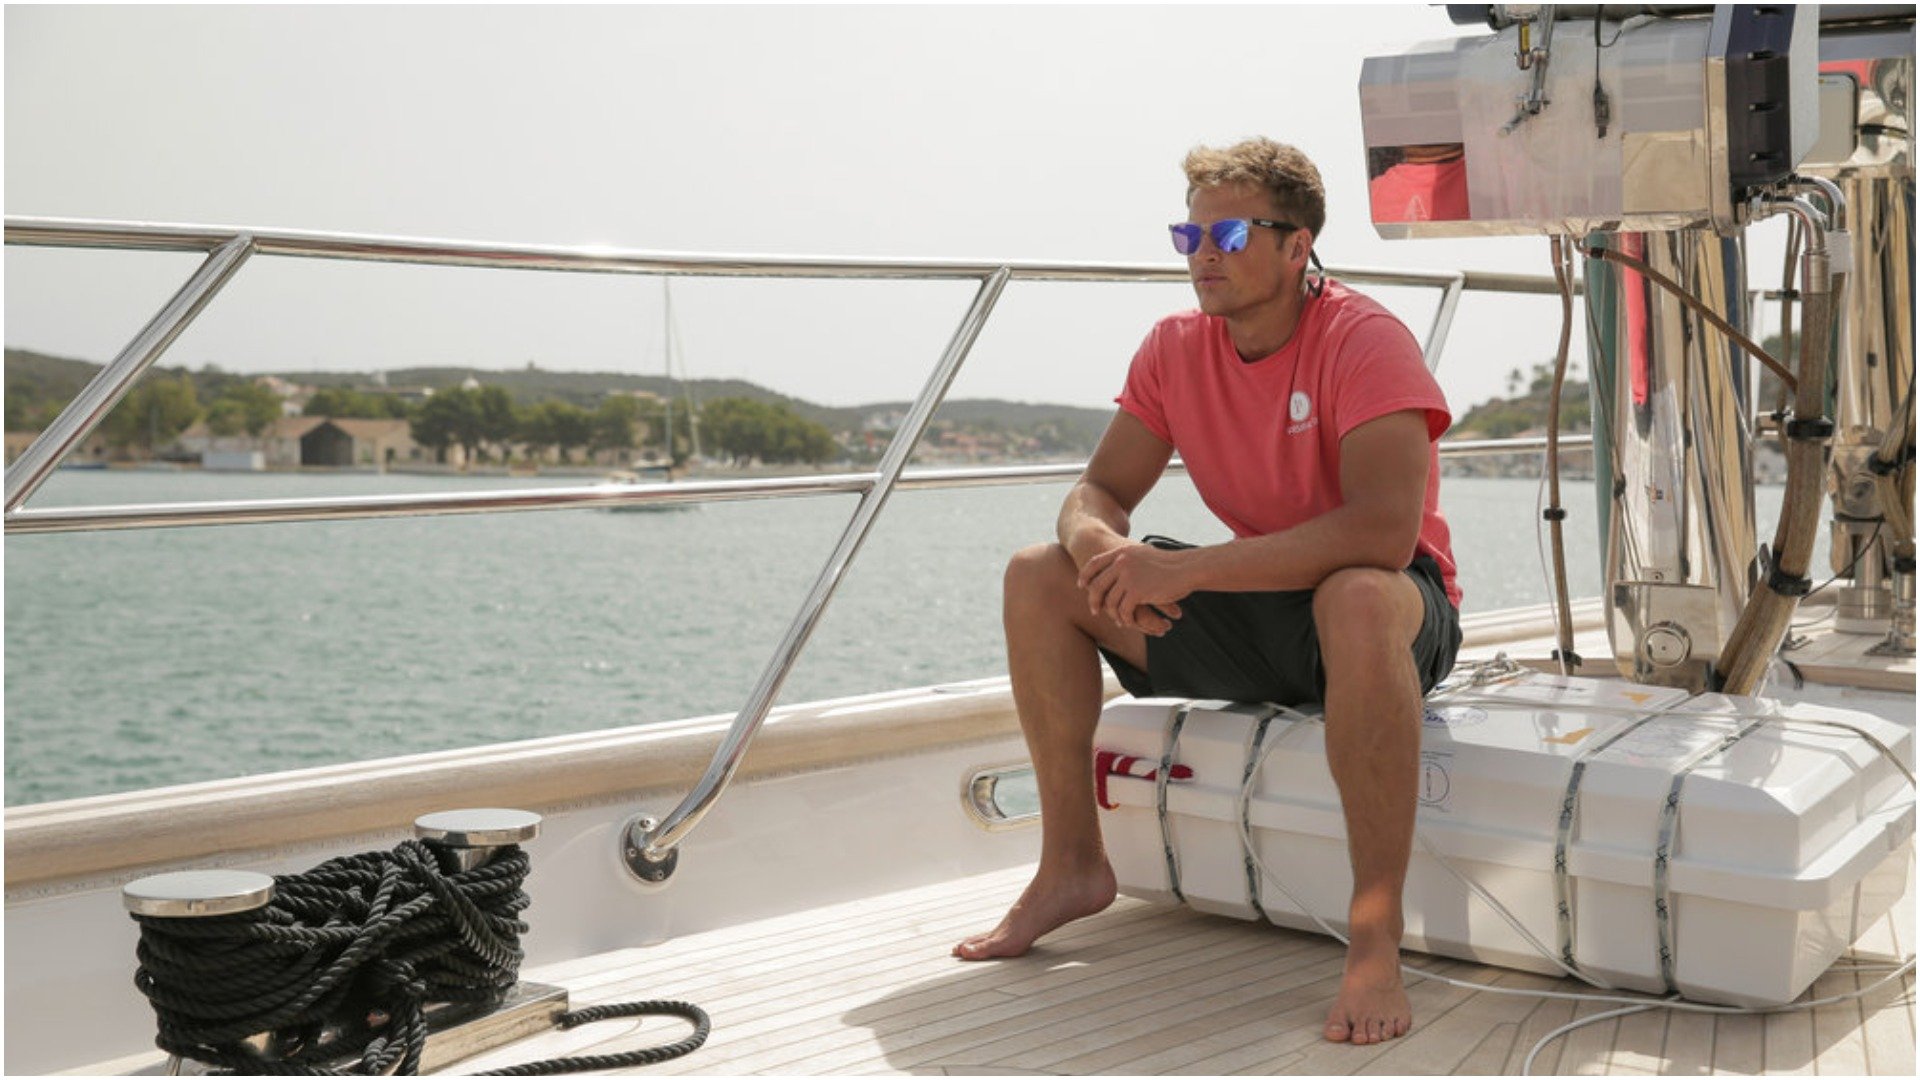 Deckhand Tom Pearson from 'Below Deck Sailing Yacht' sits on deck on Parsifal III 